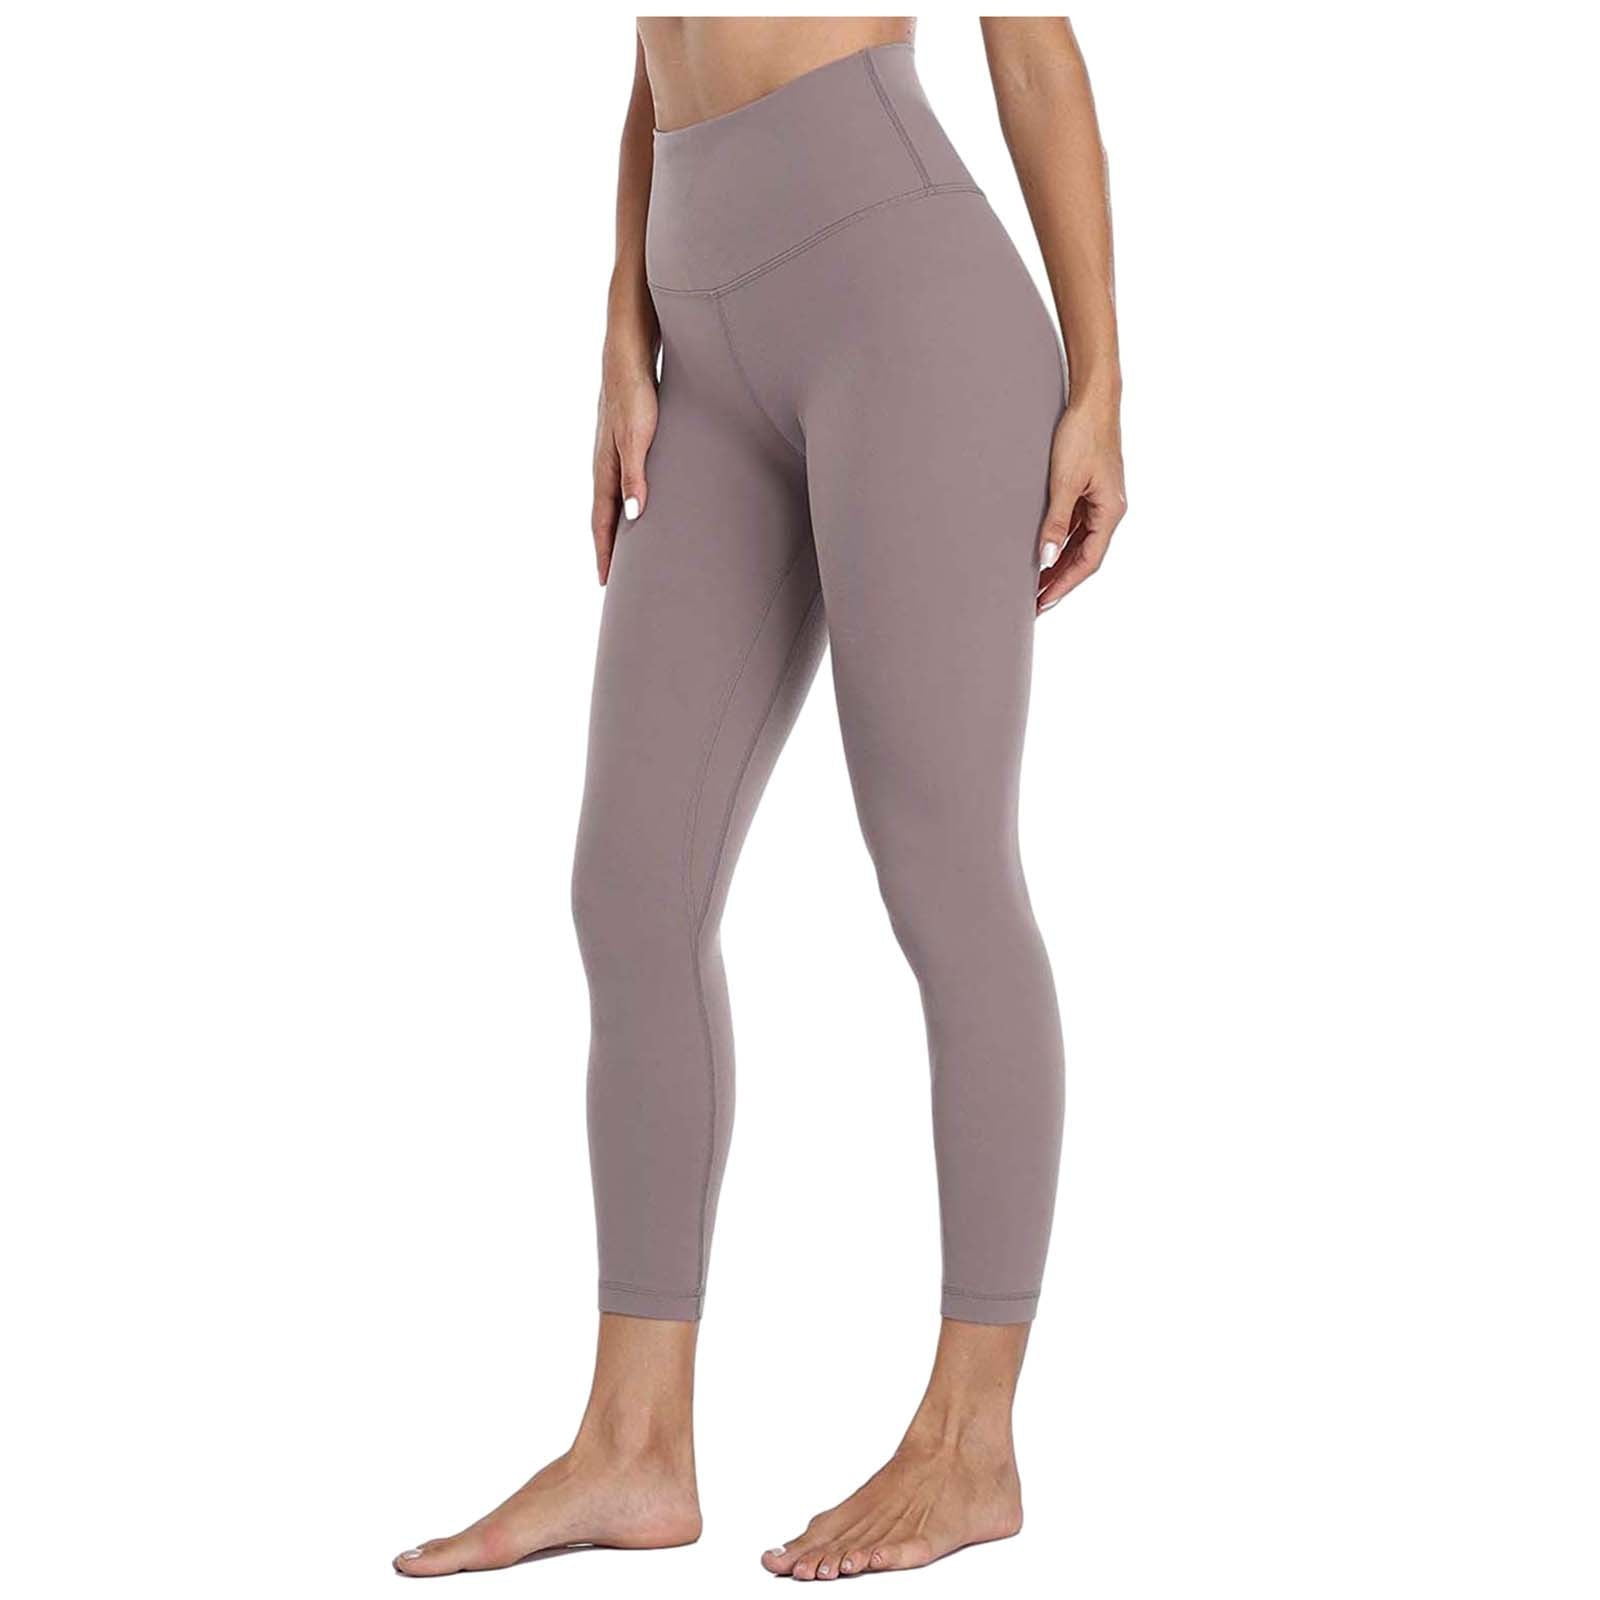 RYRJJ Women's High Waisted Compression Leggings Solid Butt Lifting Stretchy  Workout Athletic Running Yoga Pants(Gray,S)